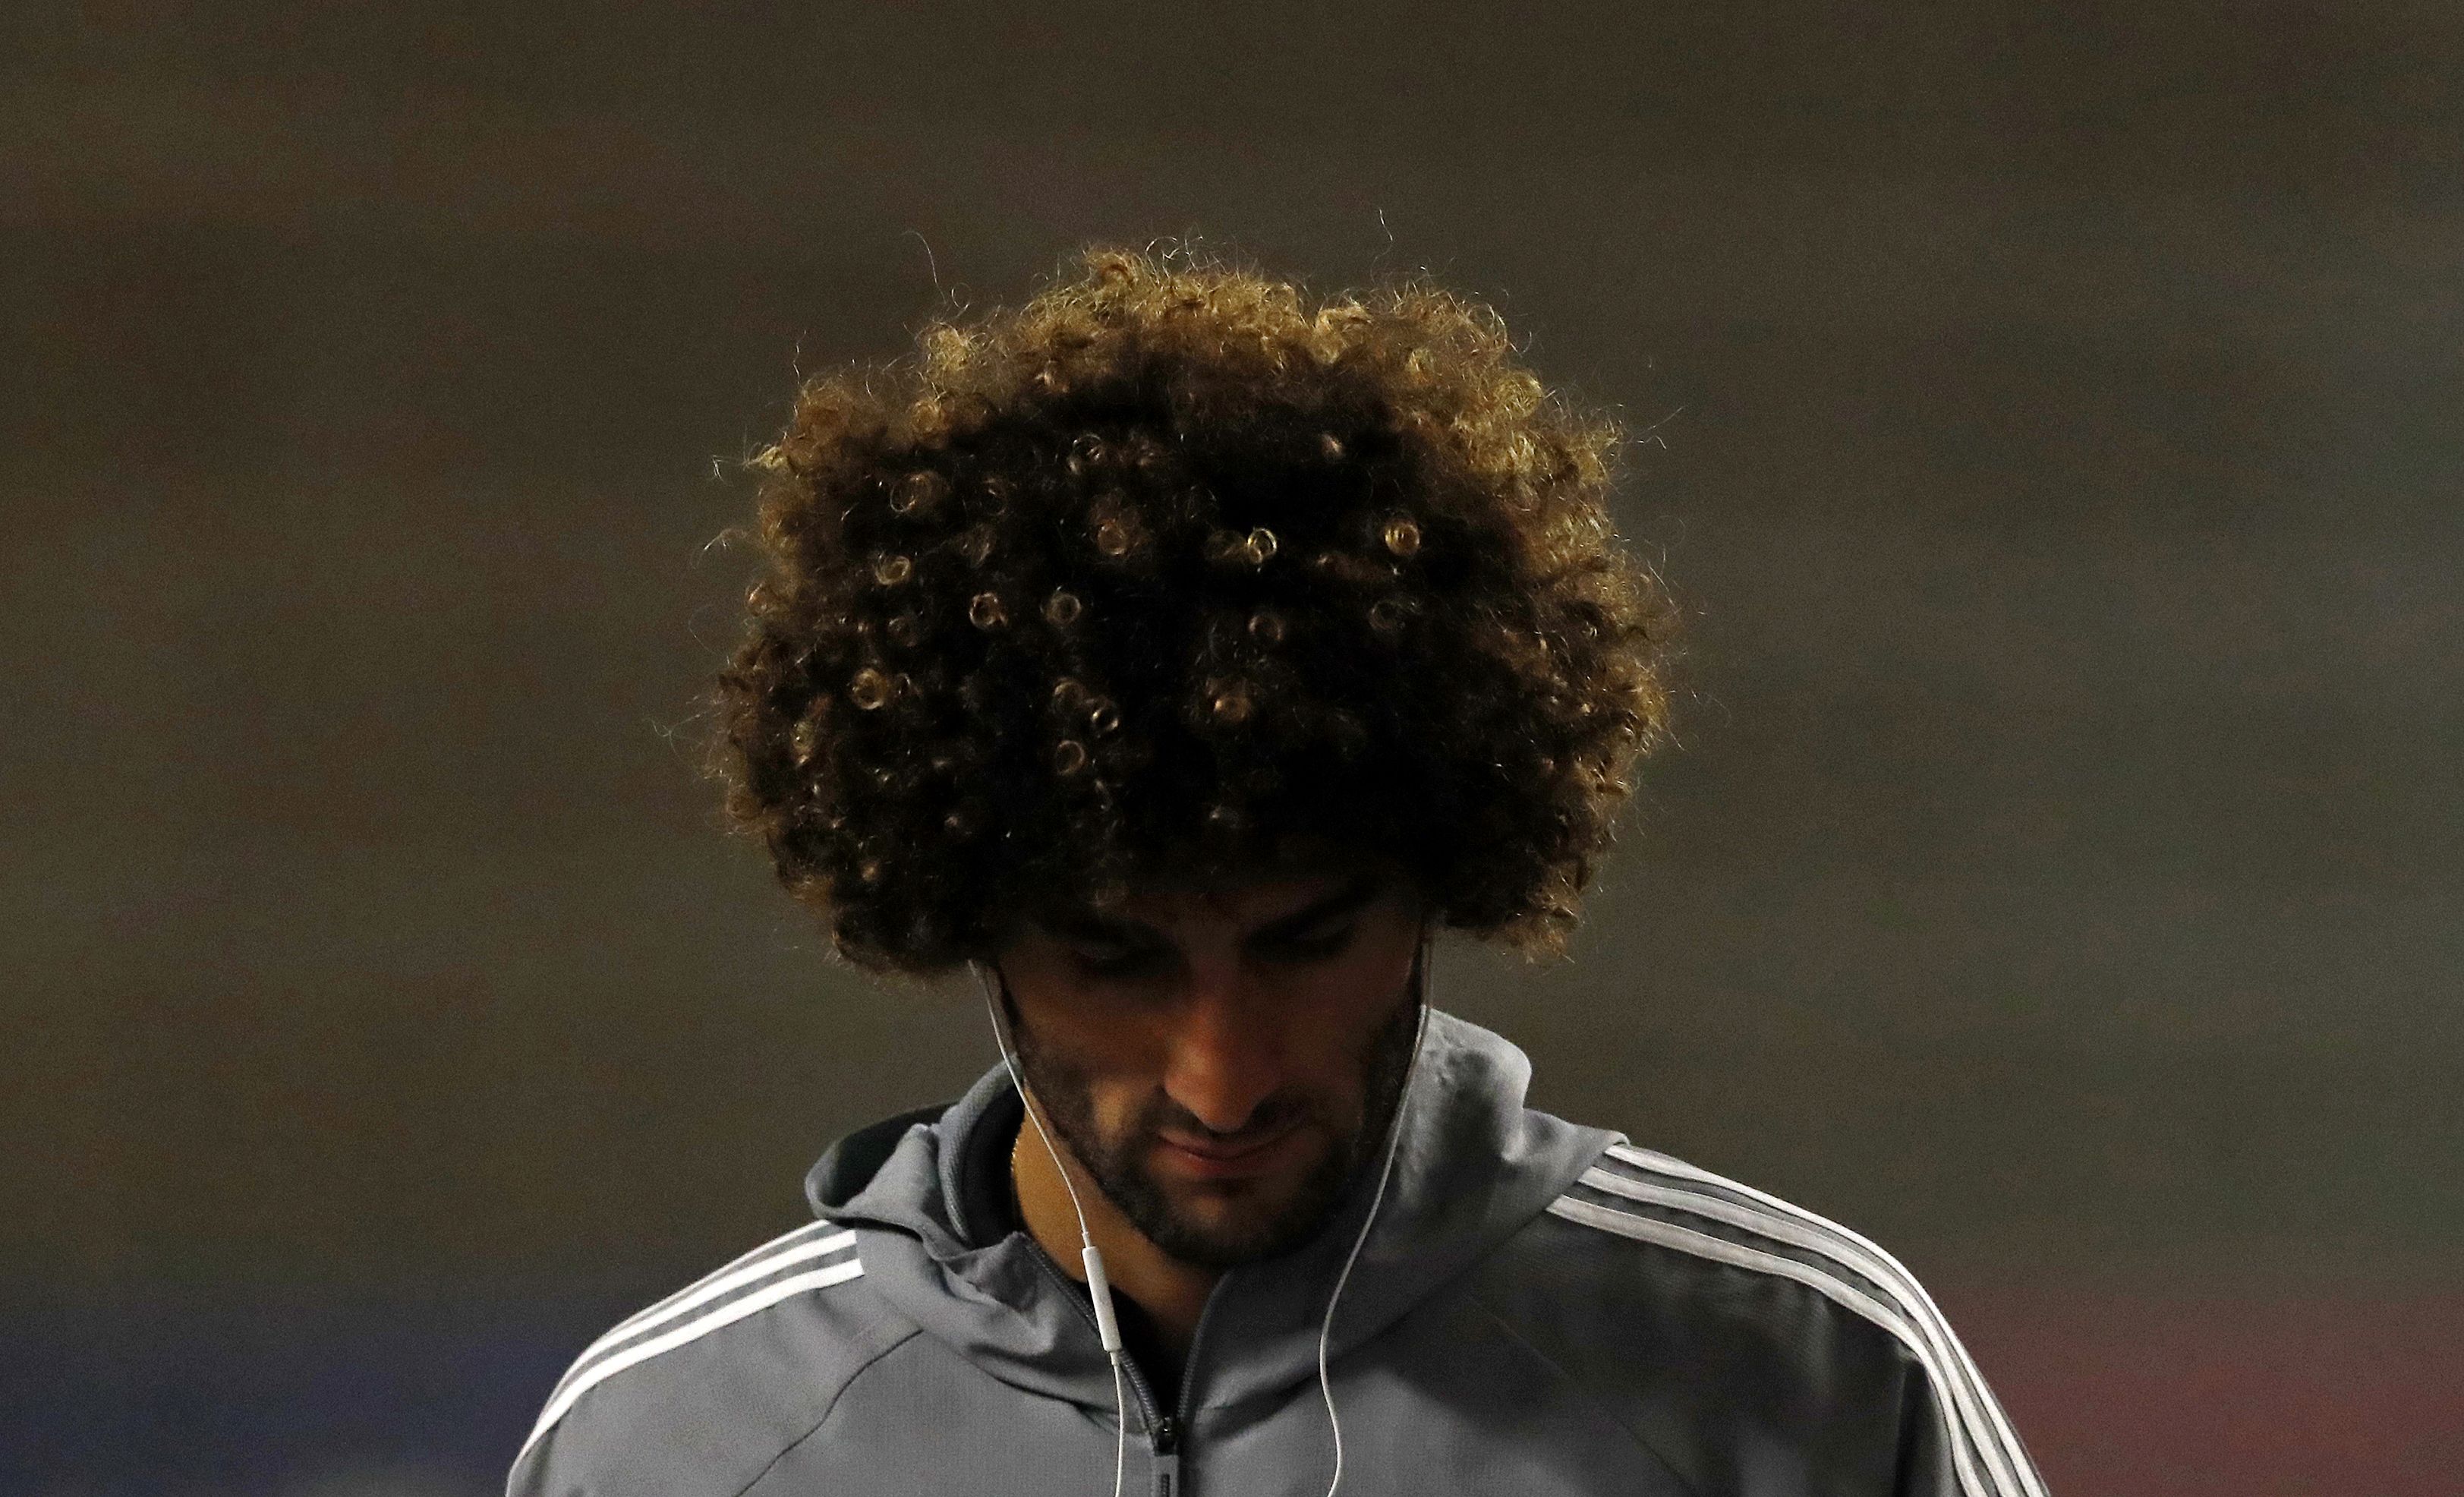 Manchester United midfielder Marouane Fellaini enters the stadium prior to the International Champions Cup soccer match against Manchester City at NRG Stadium on July 20, 2017 in Houston, Texas. / AFP PHOTO / AARON M. SPRECHER        (Photo credit should read AARON M. SPRECHER/AFP/Getty Images)